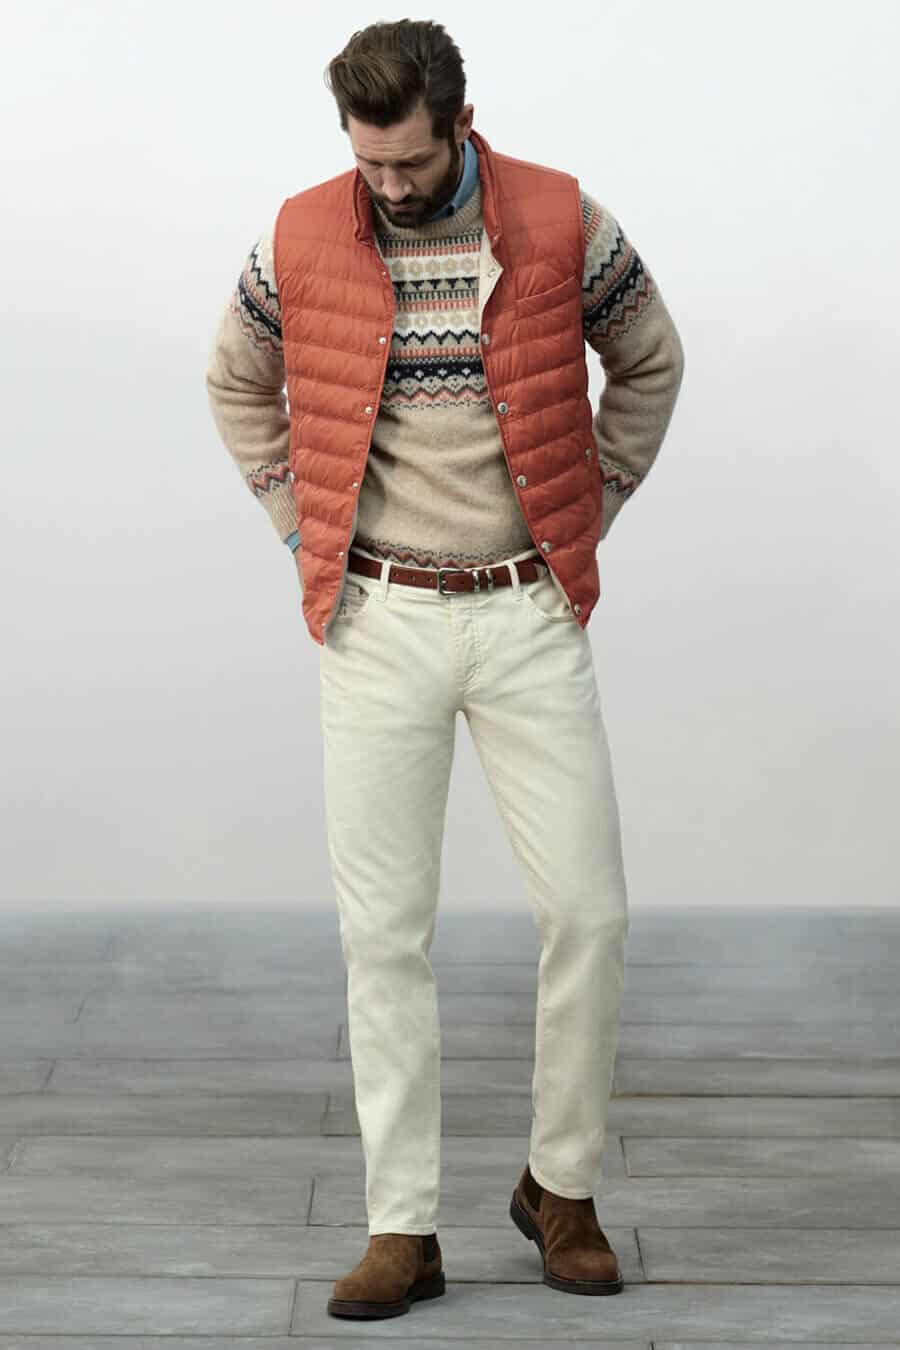 Men's winter white jeans, fair isle jumper and gilet outfit